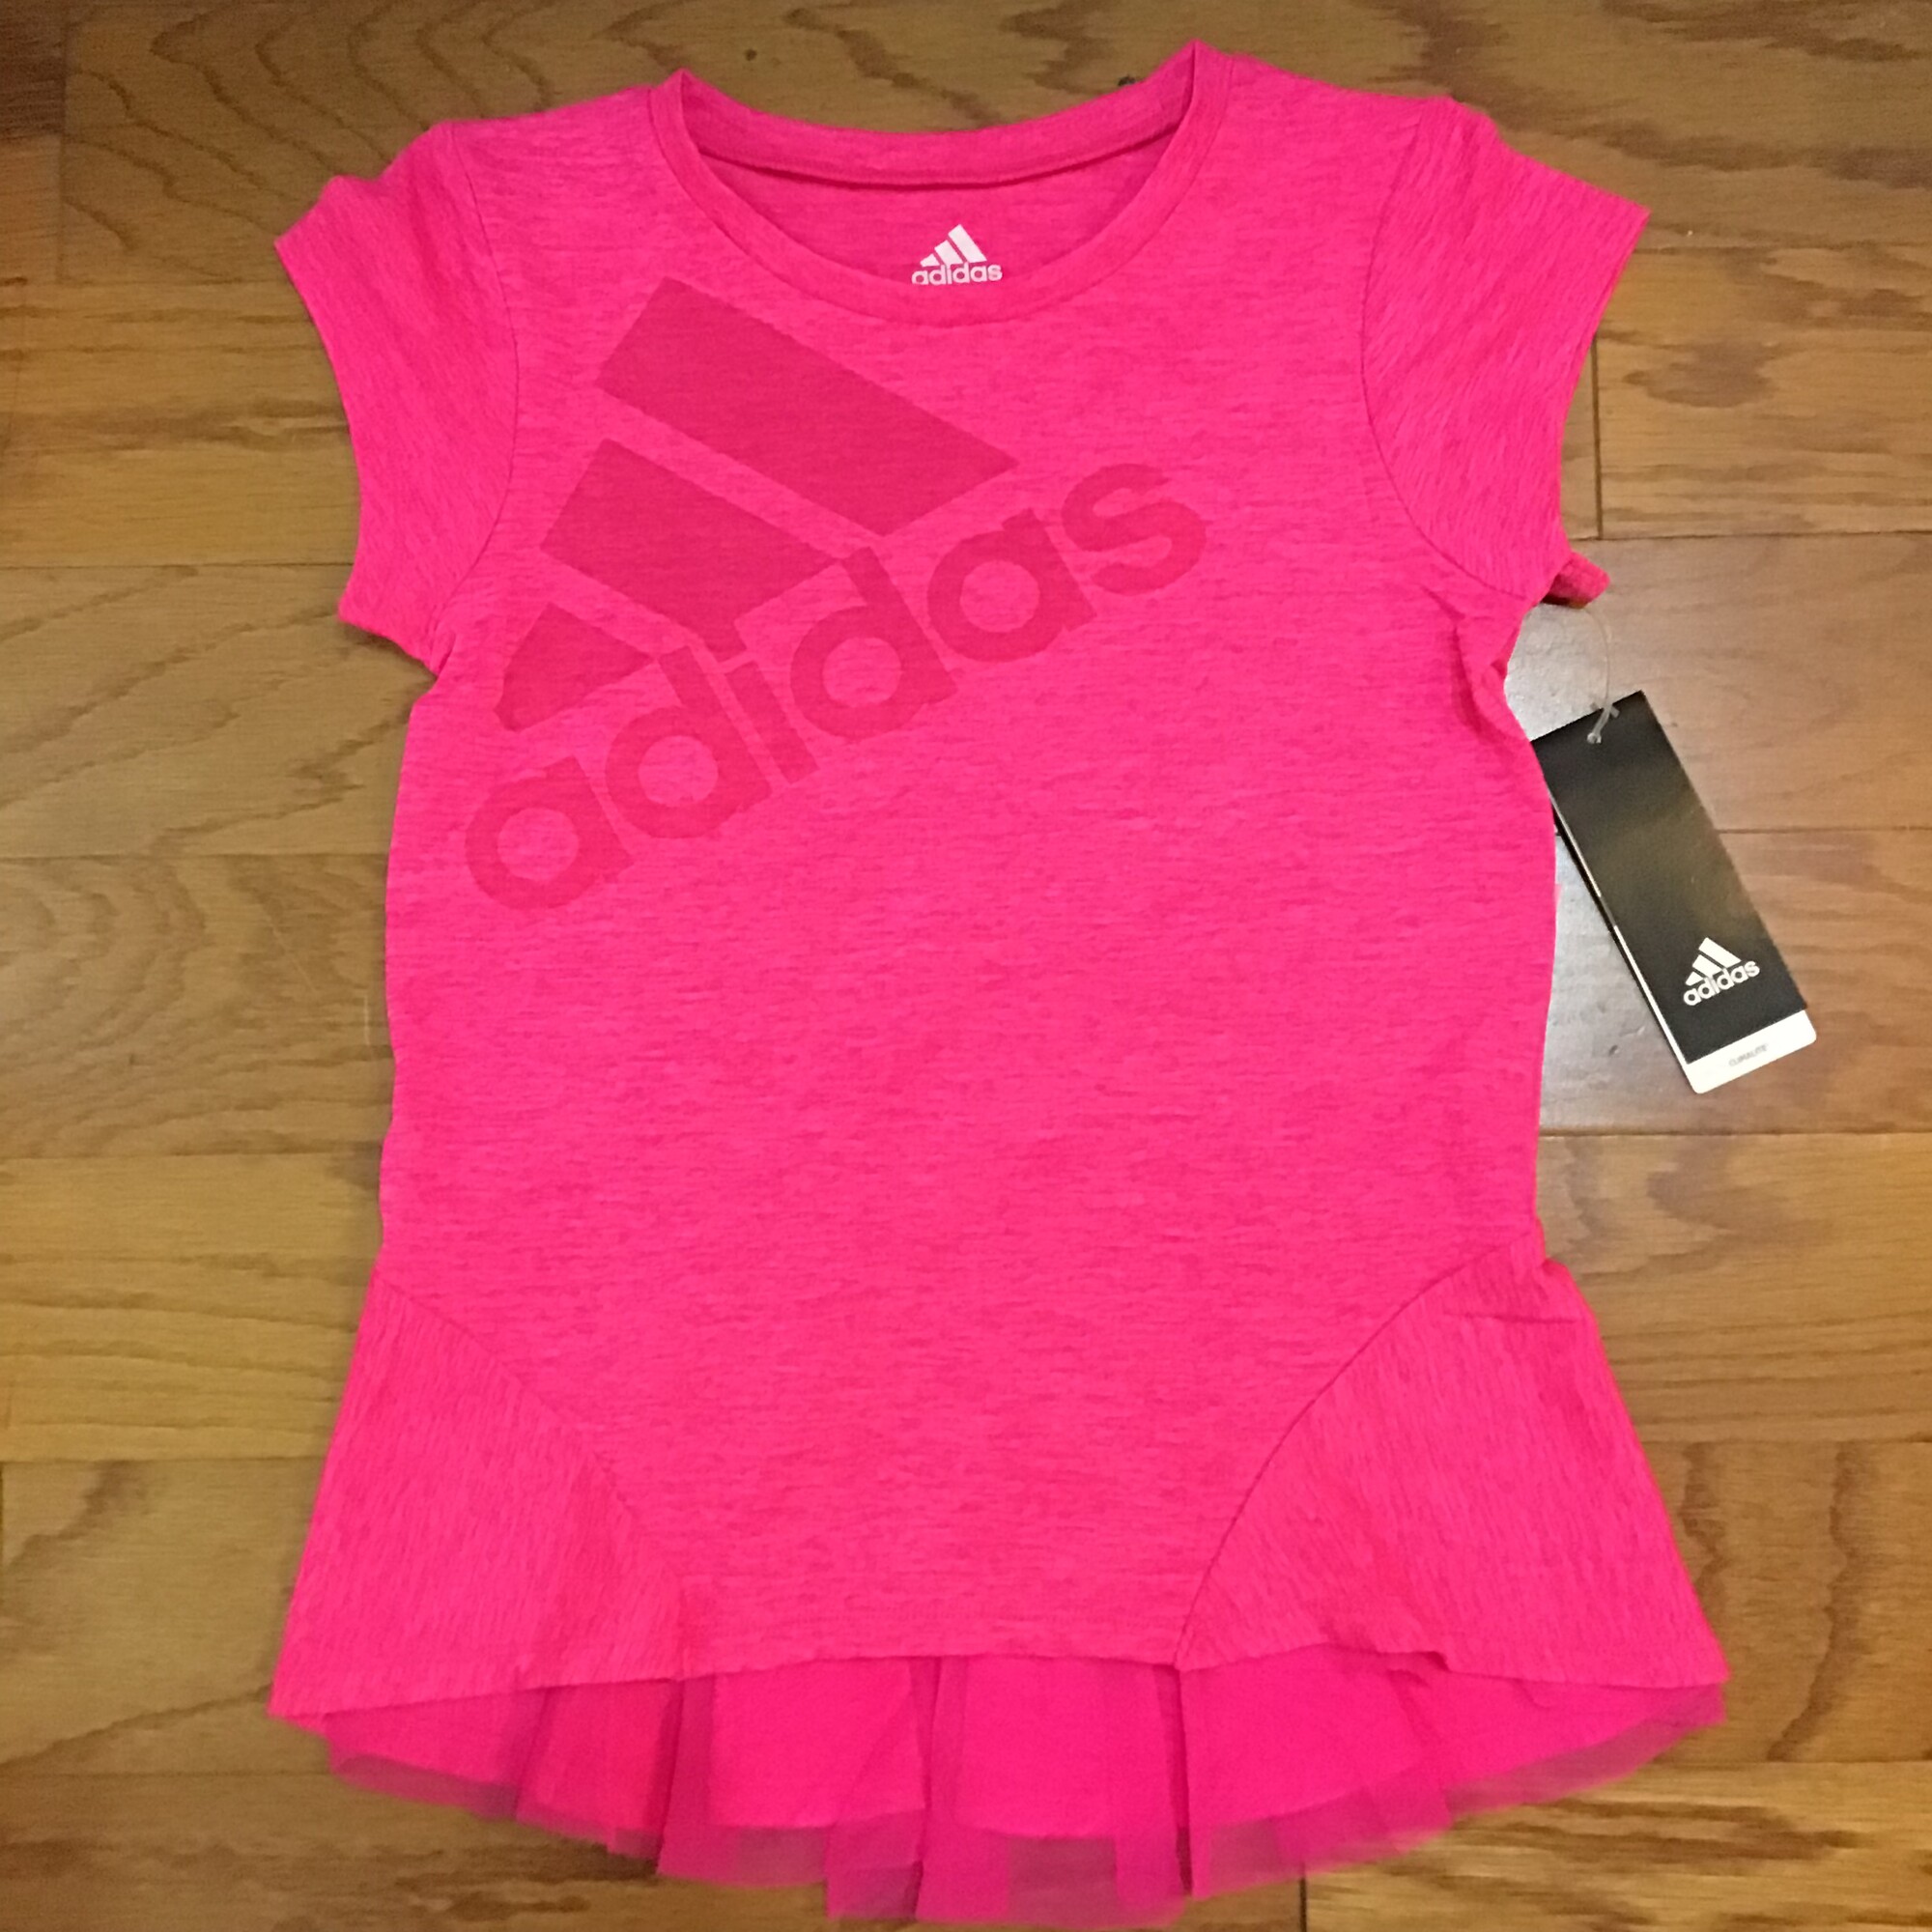 Adidas Shirt NEW, Pink, Size: 7-8

brand new with tag

ALL ONLINE SALES ARE FINAL.
NO RETURNS
REFUNDS
OR EXCHANGES

PLEASE ALLOW AT LEAST 1 WEEK FOR SHIPMENT. THANK YOU FOR SHOPPING SMALL!